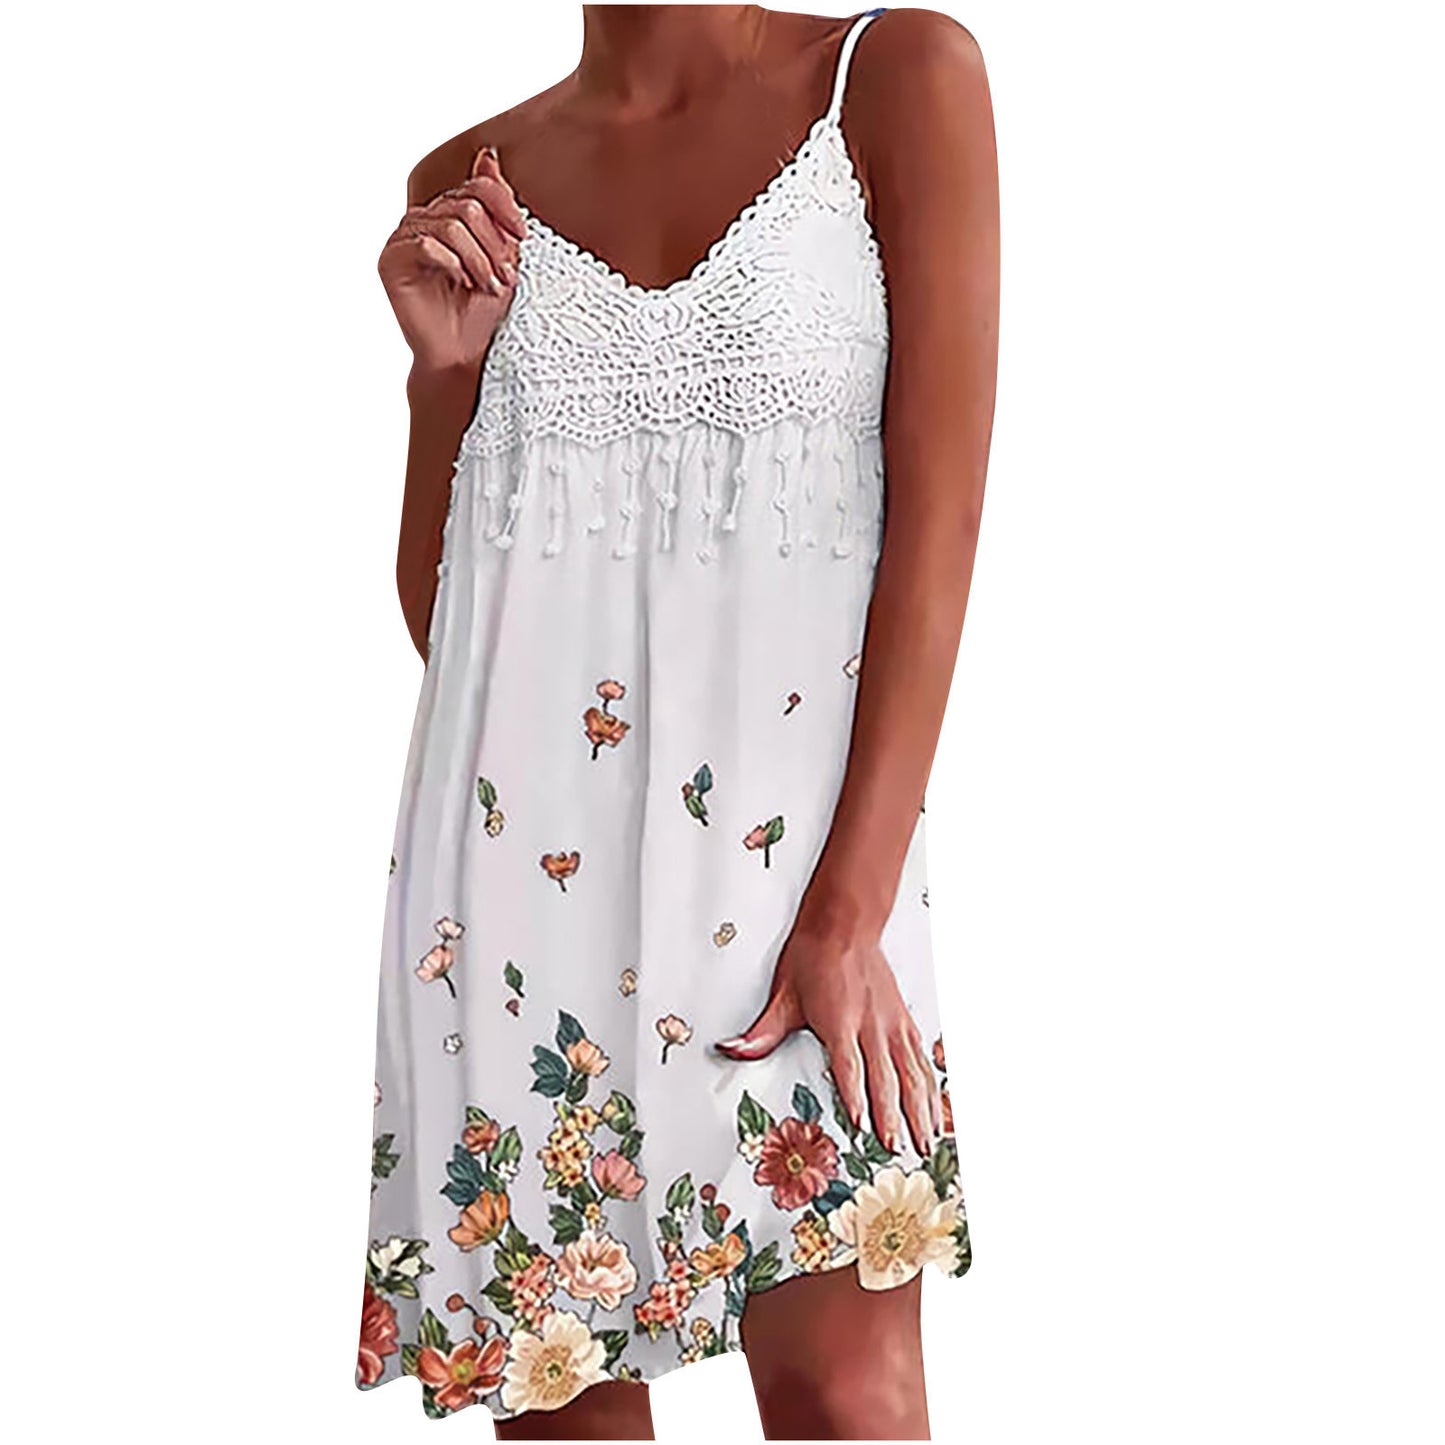 Sleeveless Slim Dress with Lace V-Neck, Digital Print, and Sling